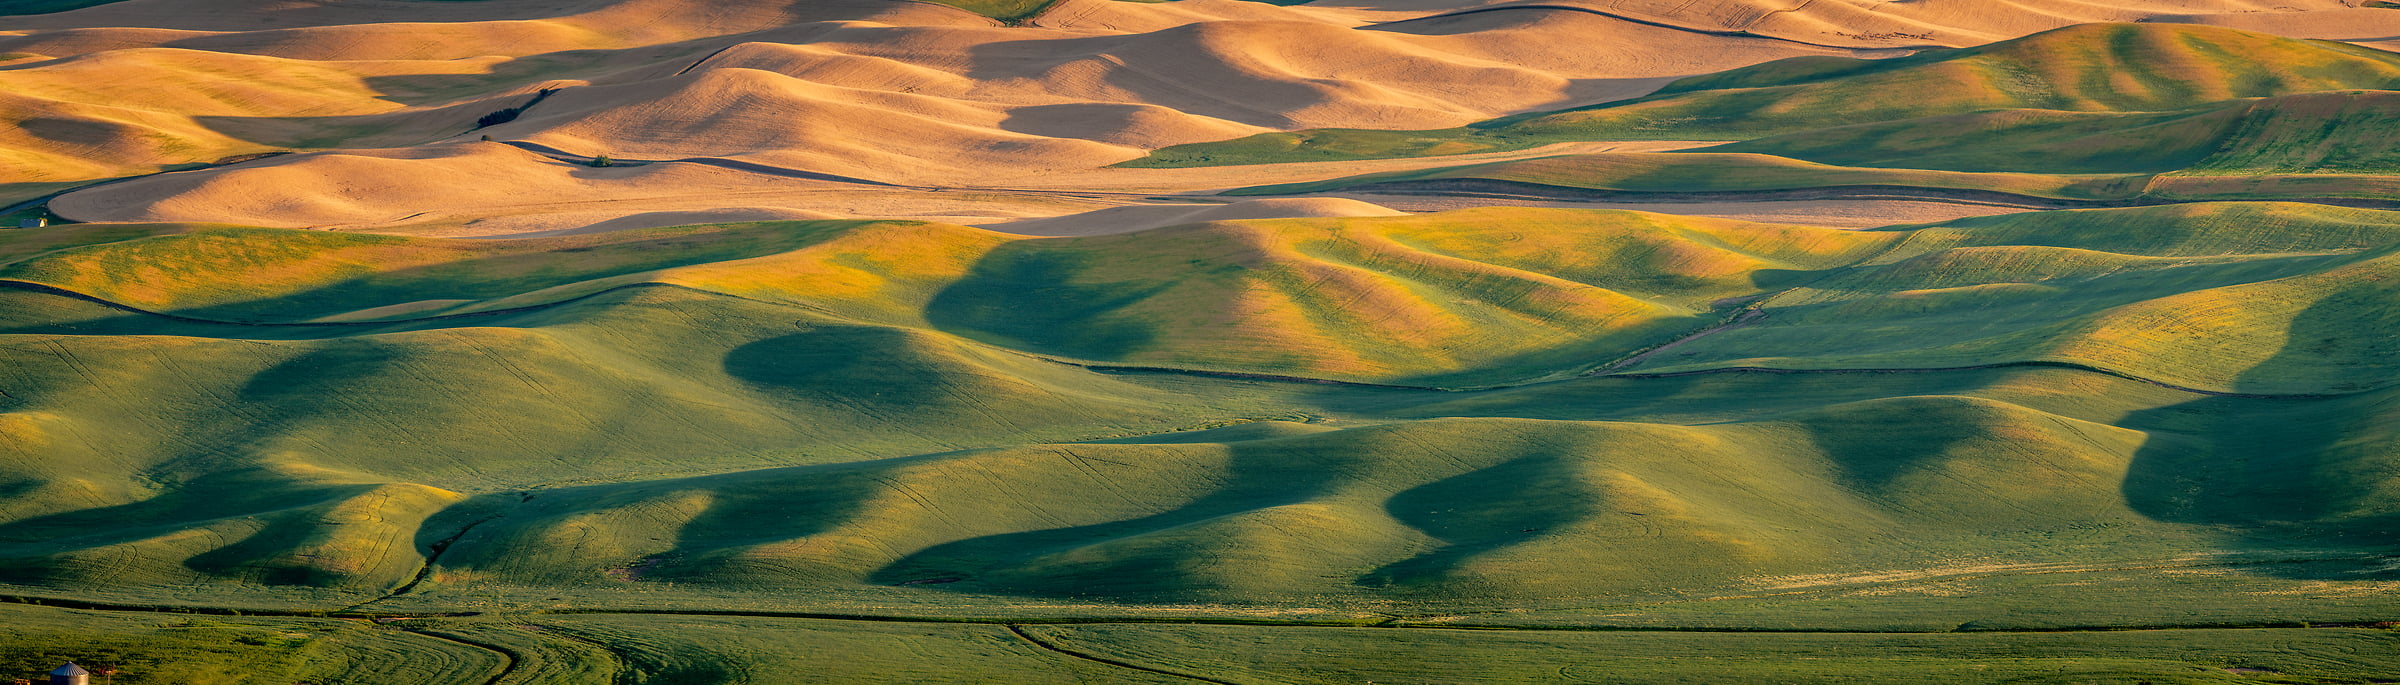 234 megapixels! A very high resolution, large-format VAST photo print of the fields and hills in Palouse, Washington; landscape photograph created by Tim Shields in Steptoe Butte, Washington.